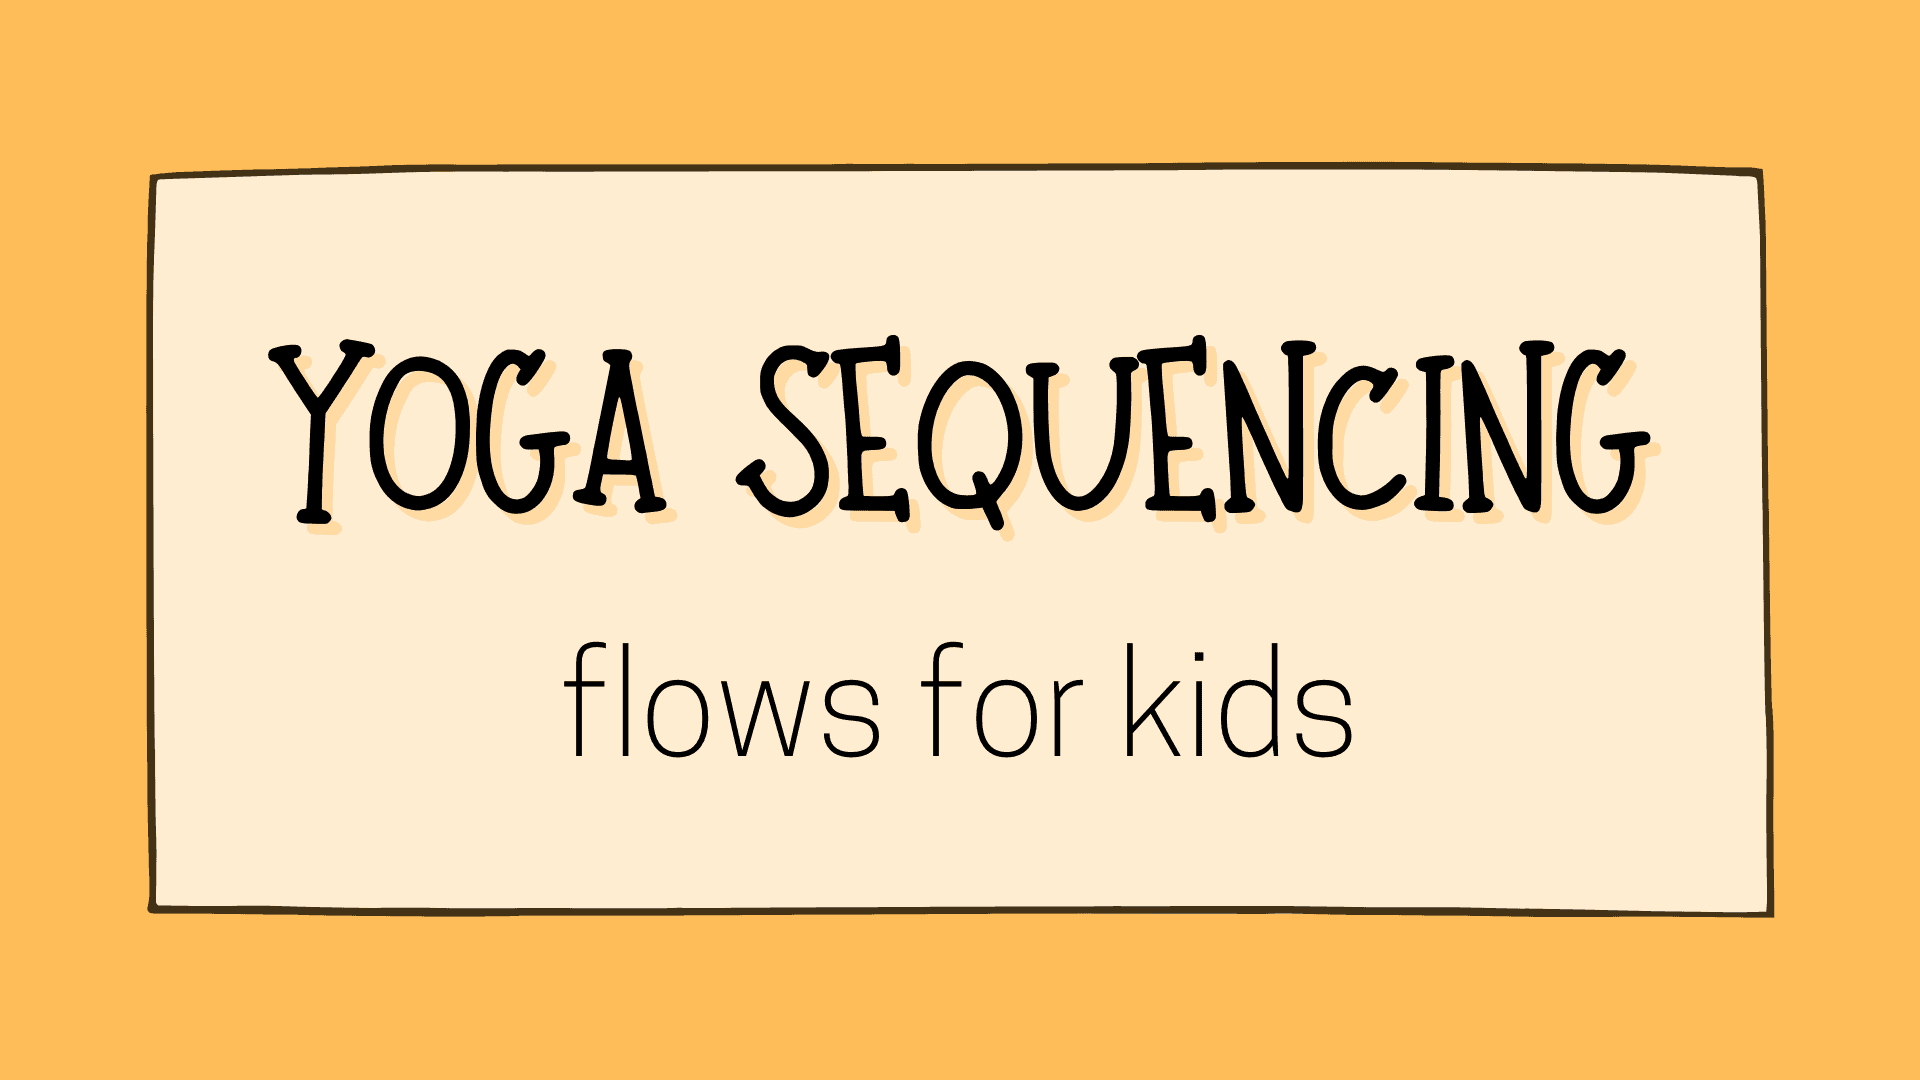 yoga sequencing flows for kids